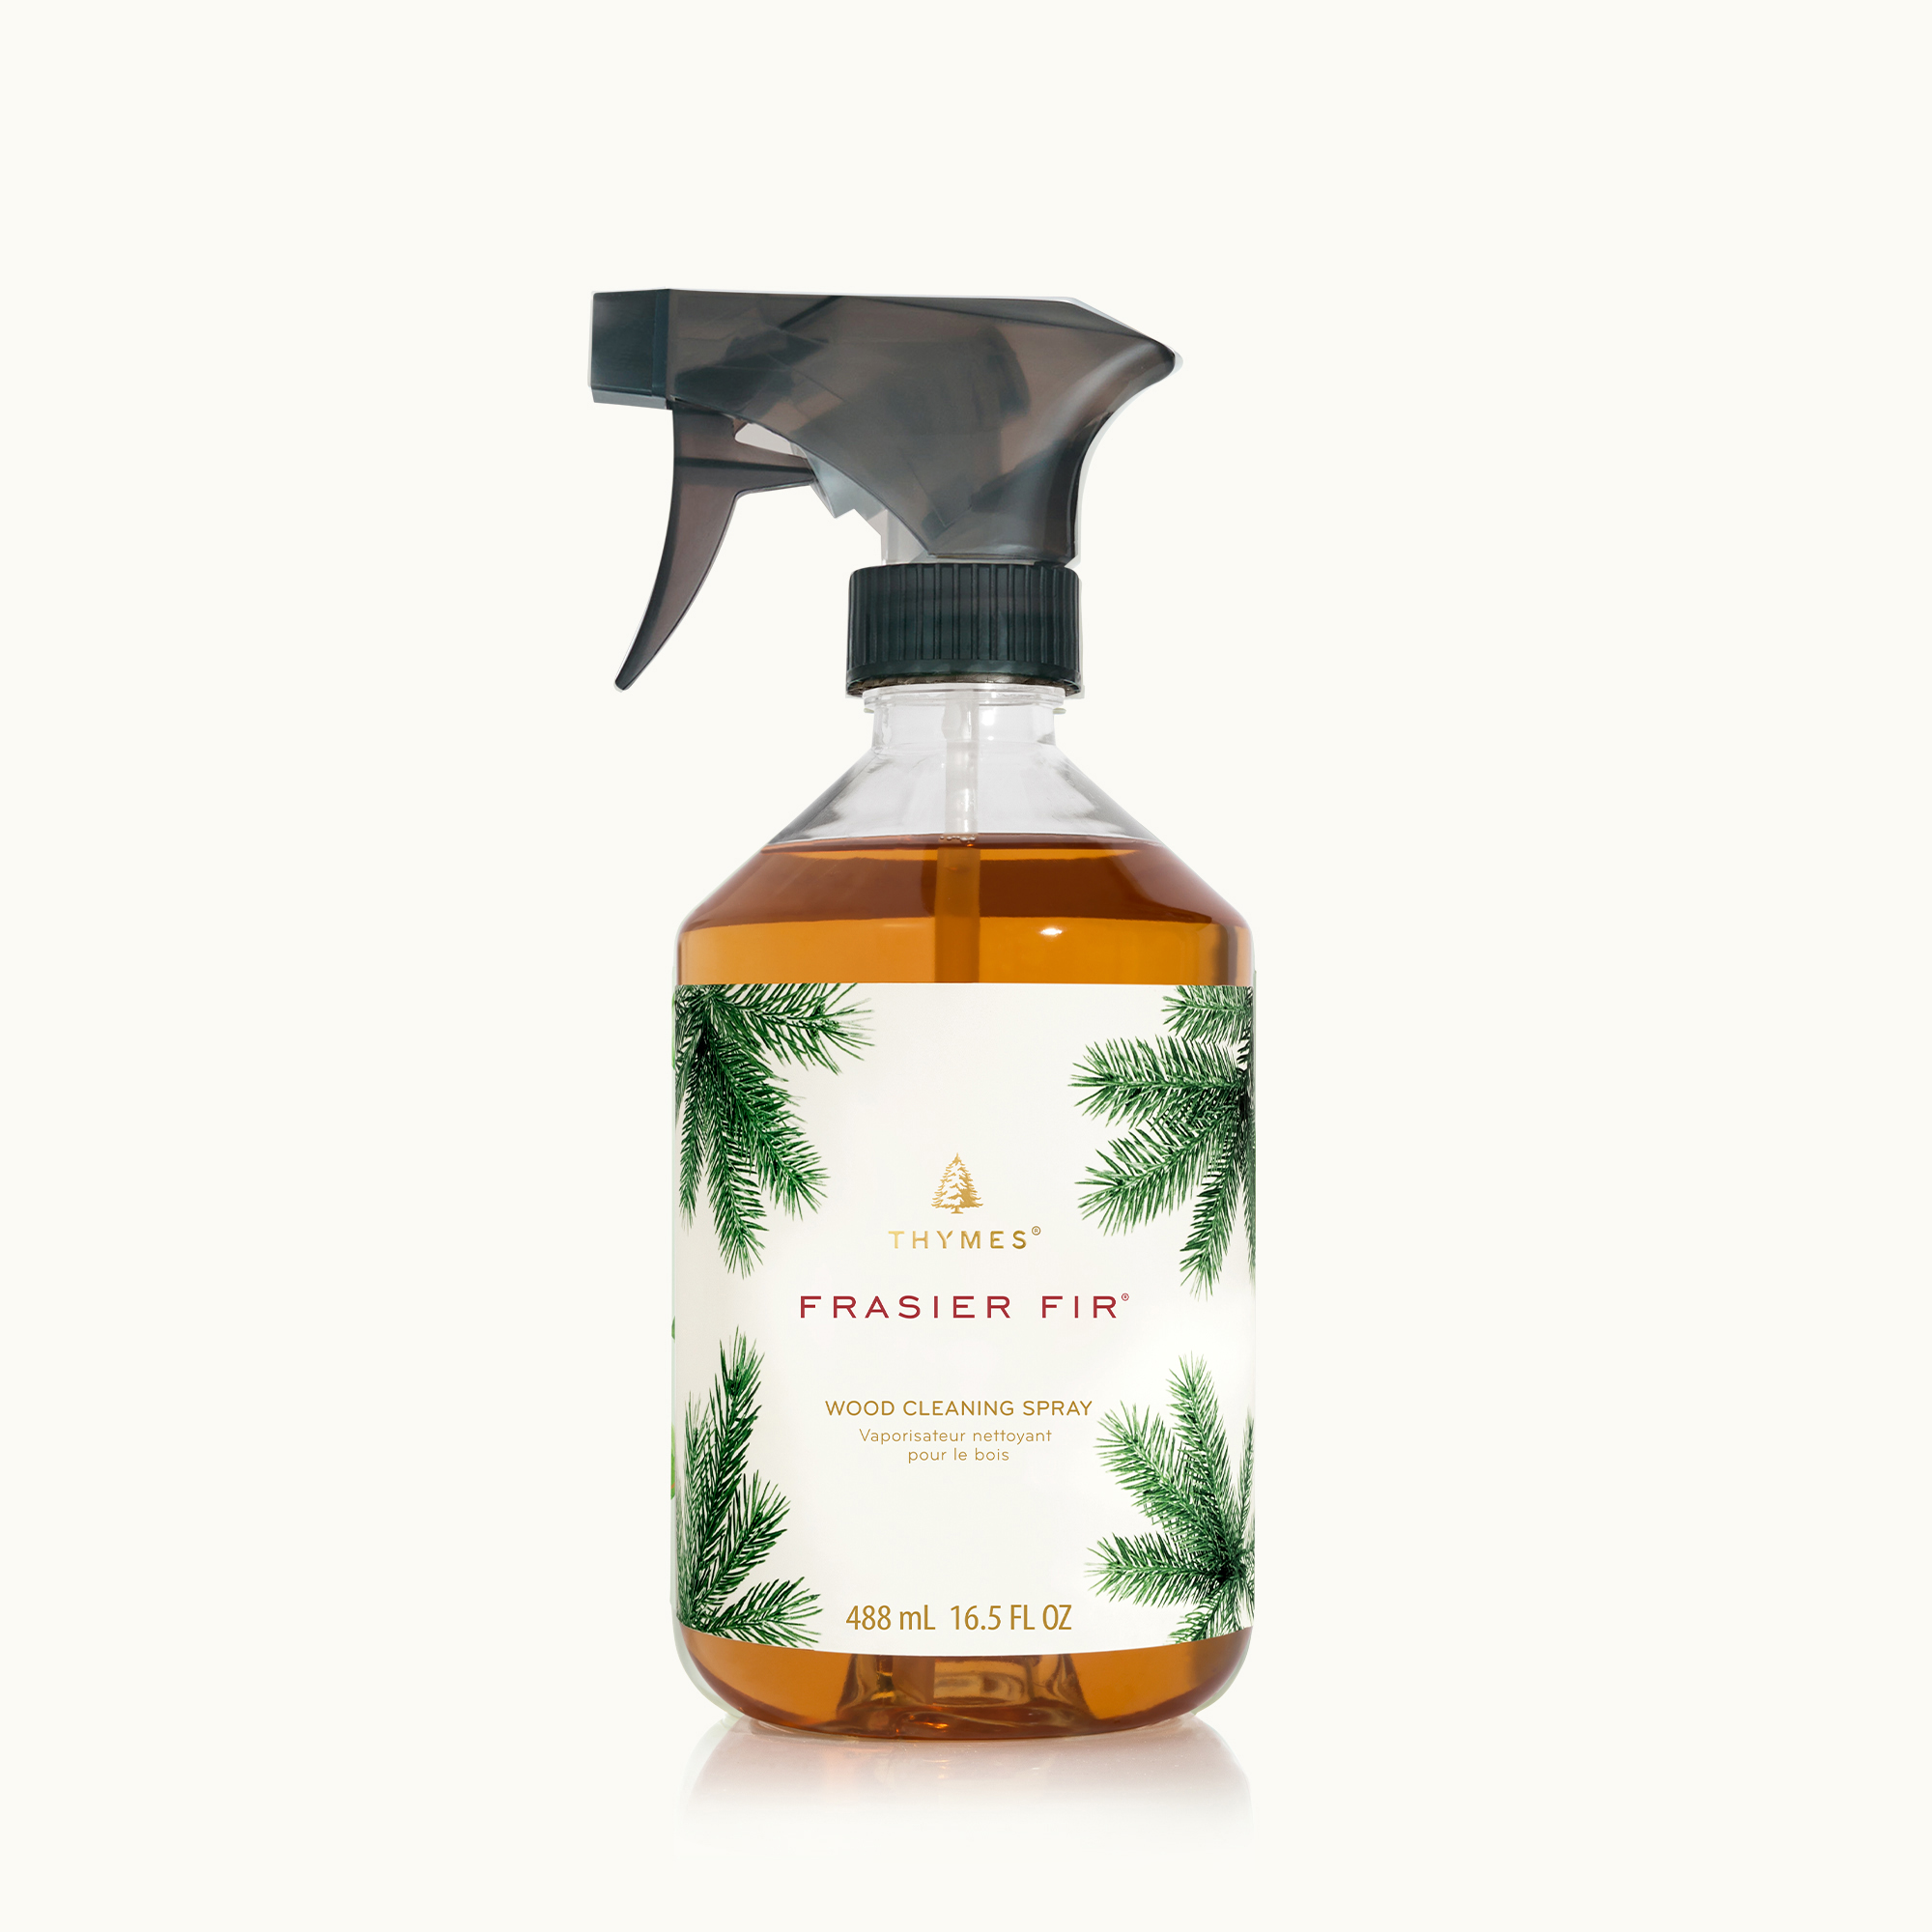 Thymes Frasier Fir All Purpose Cleaning Concentrate 16 fl oz